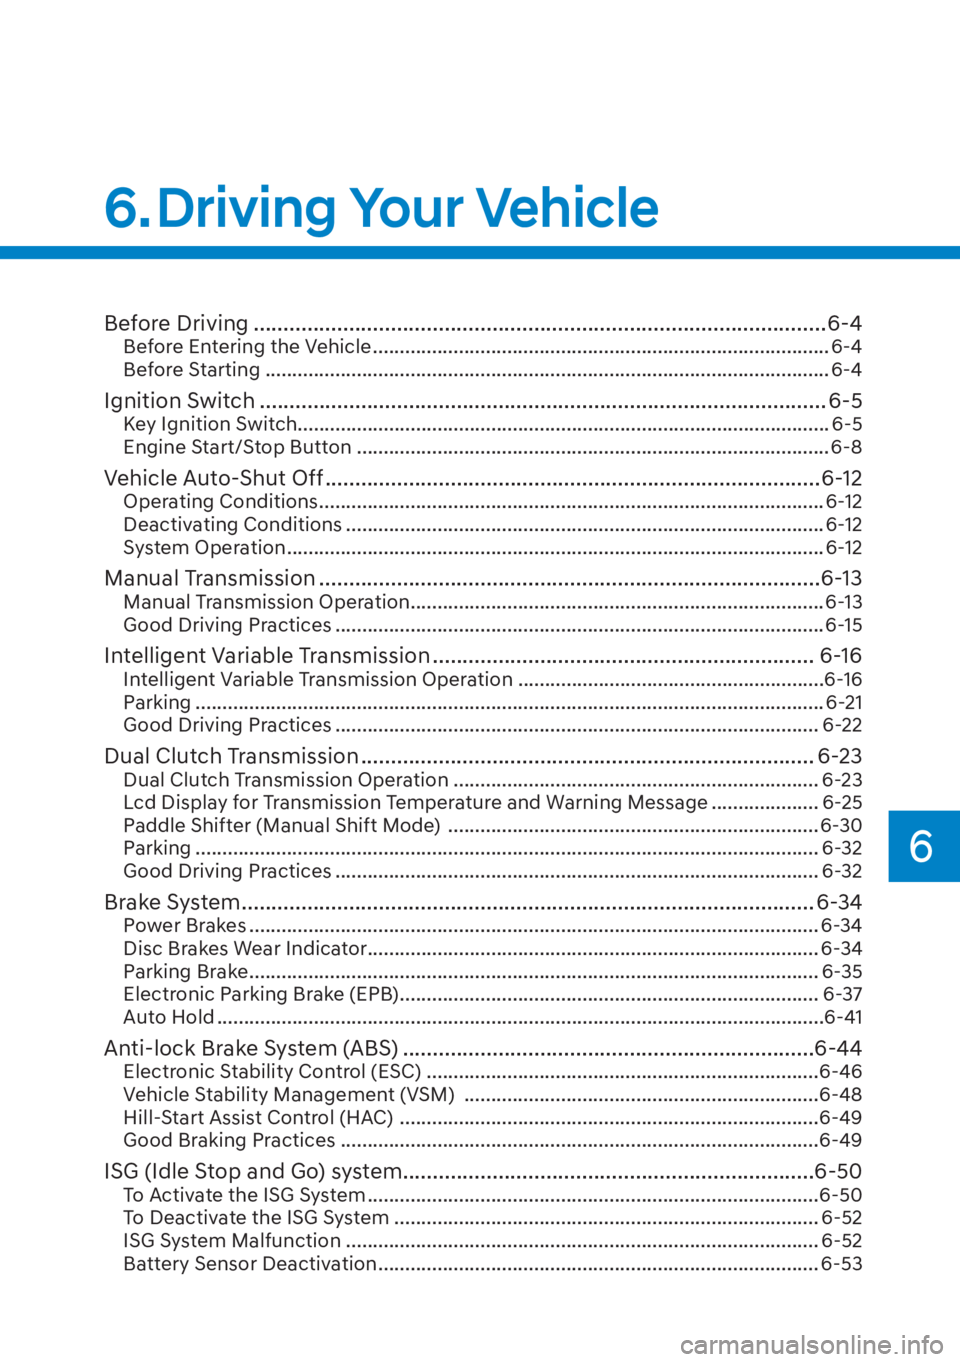 HYUNDAI ELANTRA 2023  Owners Manual 6
6. Driving Your Vehicle
Before Driving ........................................................................\
........................6-4Before Entering the Vehicle ..............................